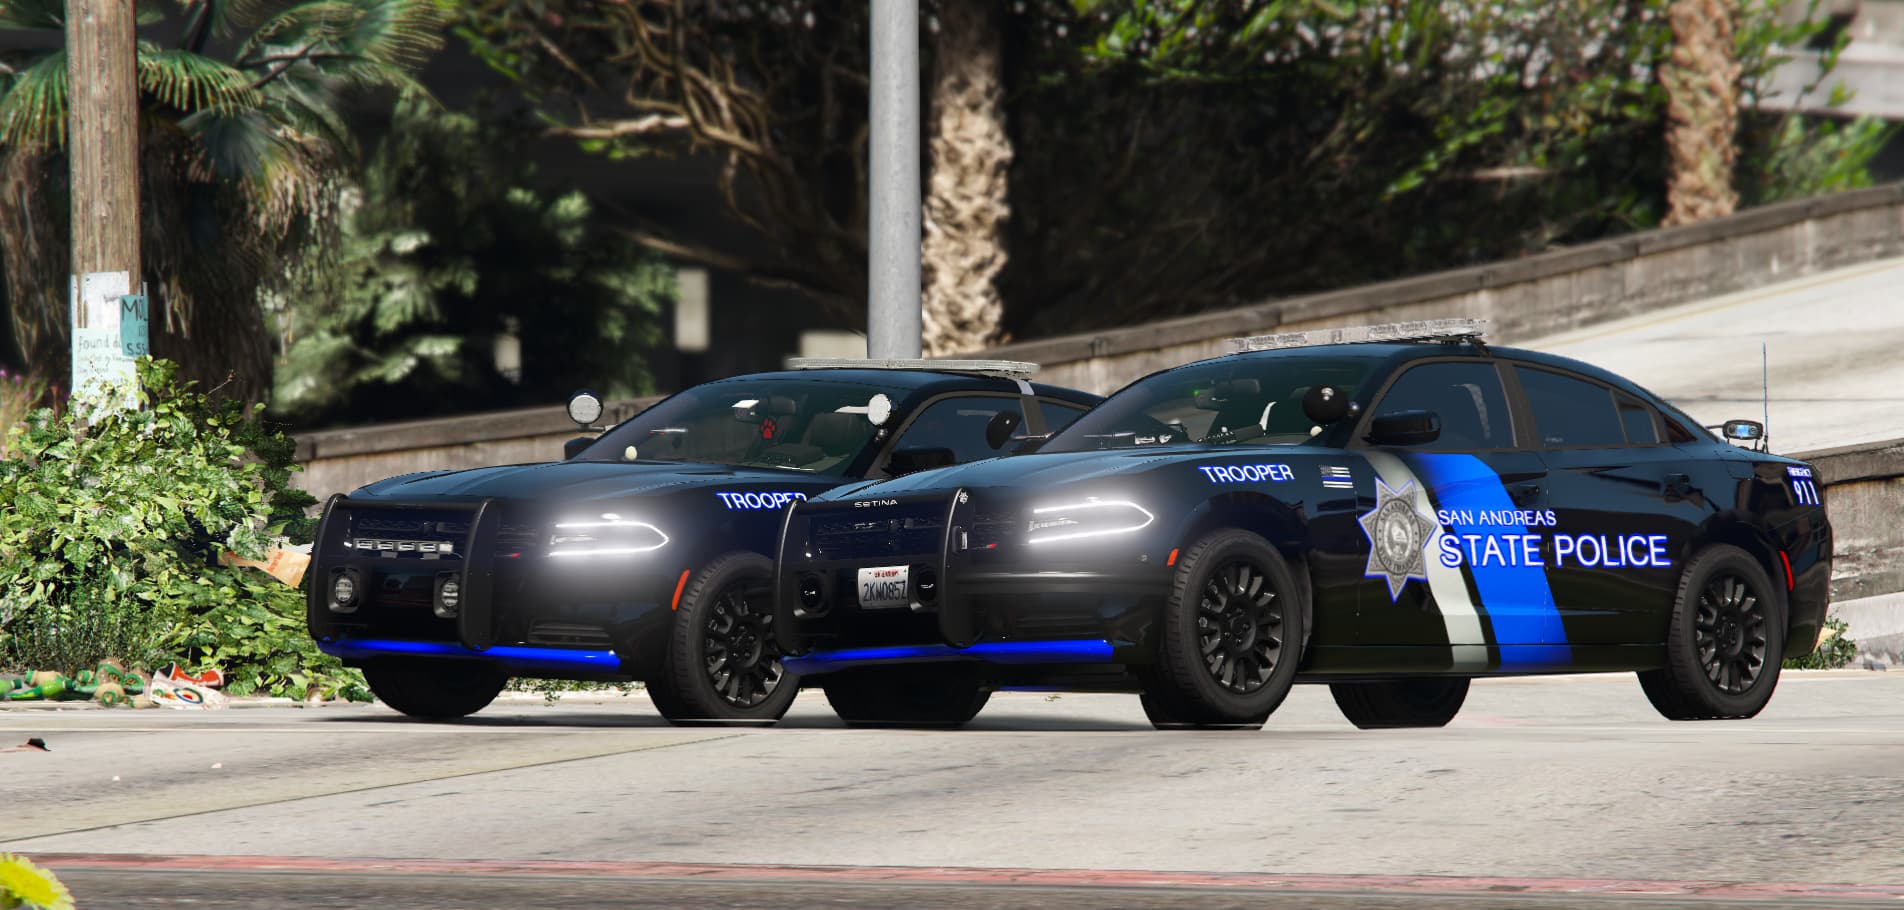 Your RP Destiny: Join YVRP Los Santos County Sheriff's Office Today!  Calling All Deputies - Newbies & Pros! Secure Your Spot on the [QBCore]  Server! [Active 24/7] [Whitelisted] : r/FiveMServers